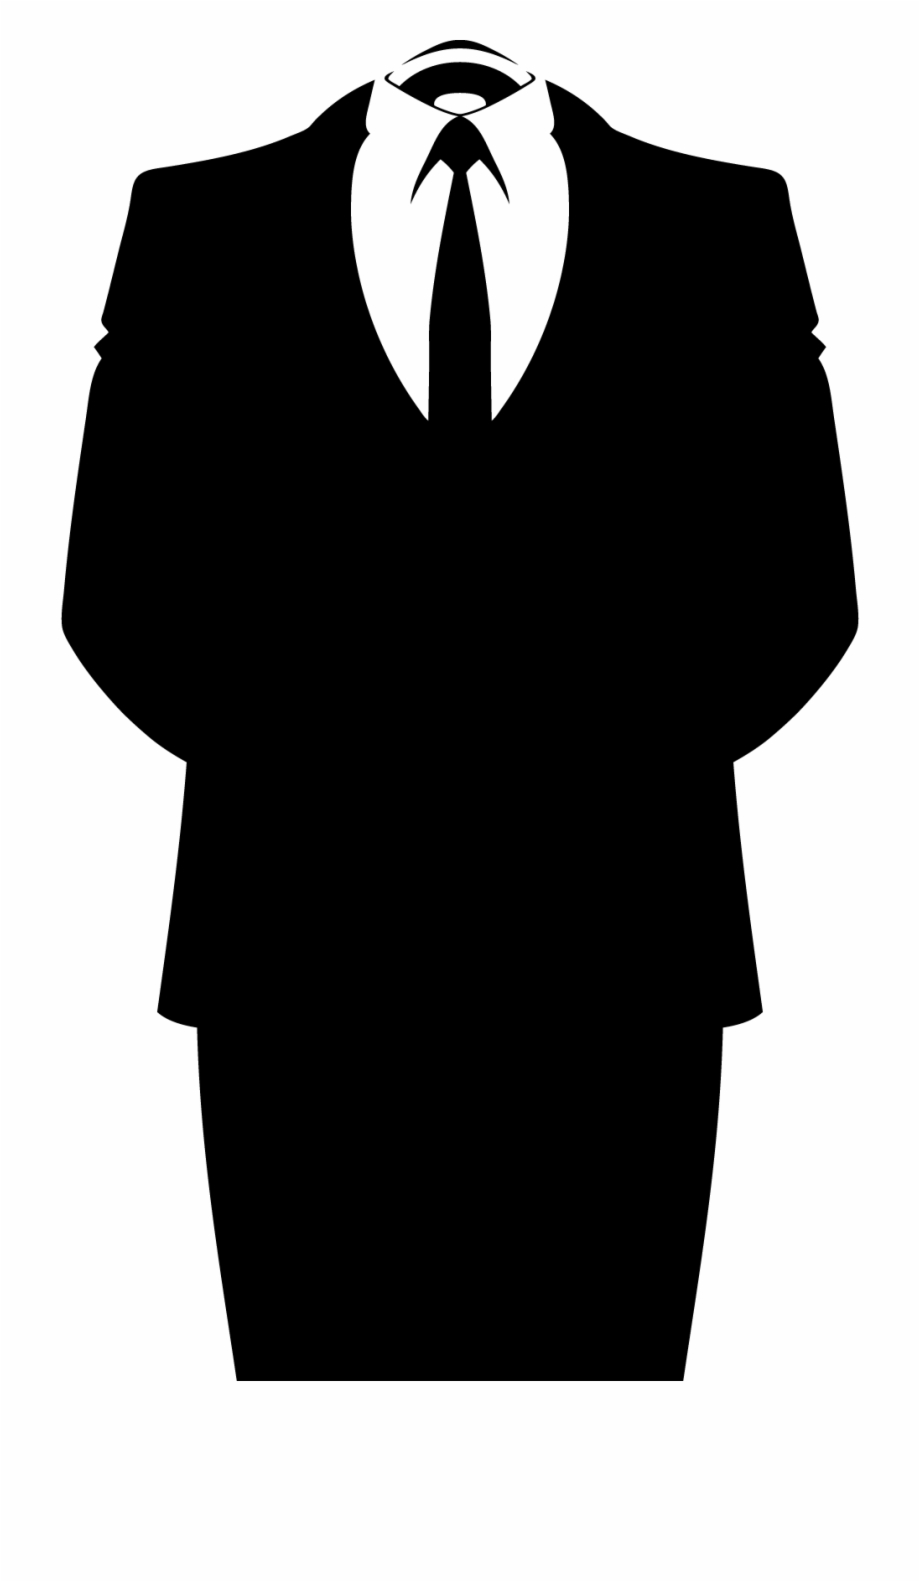 Graphic Transparent Stock Men In Suits Silhouette At